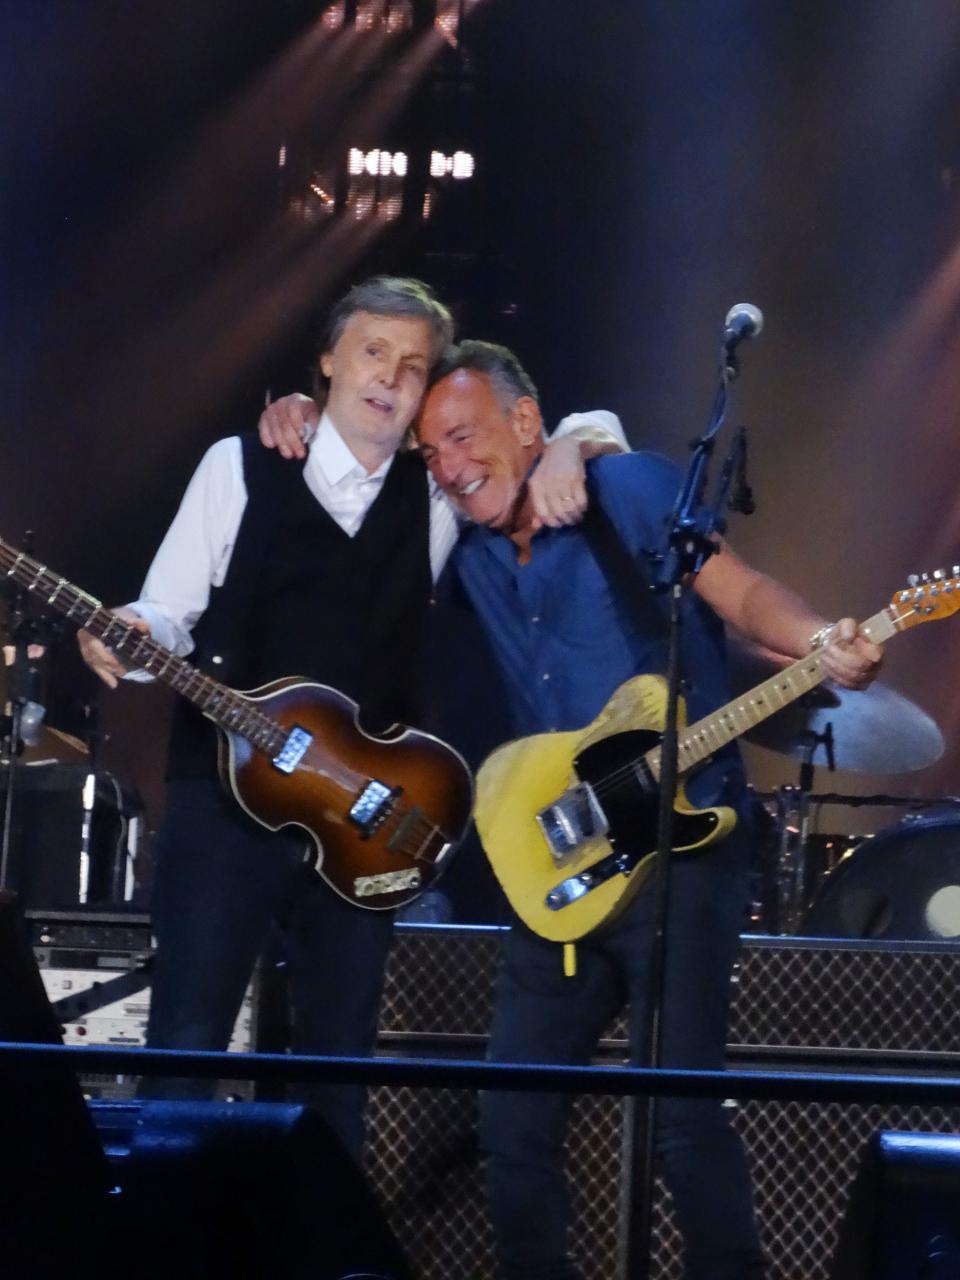 Bruce Springsteen joins Paul McCartney on stage at MetLife Stadium in East Rutherford, NJ Thursday, June 16, 2022.  Photo courtesy: Bob Gannon of Toms River